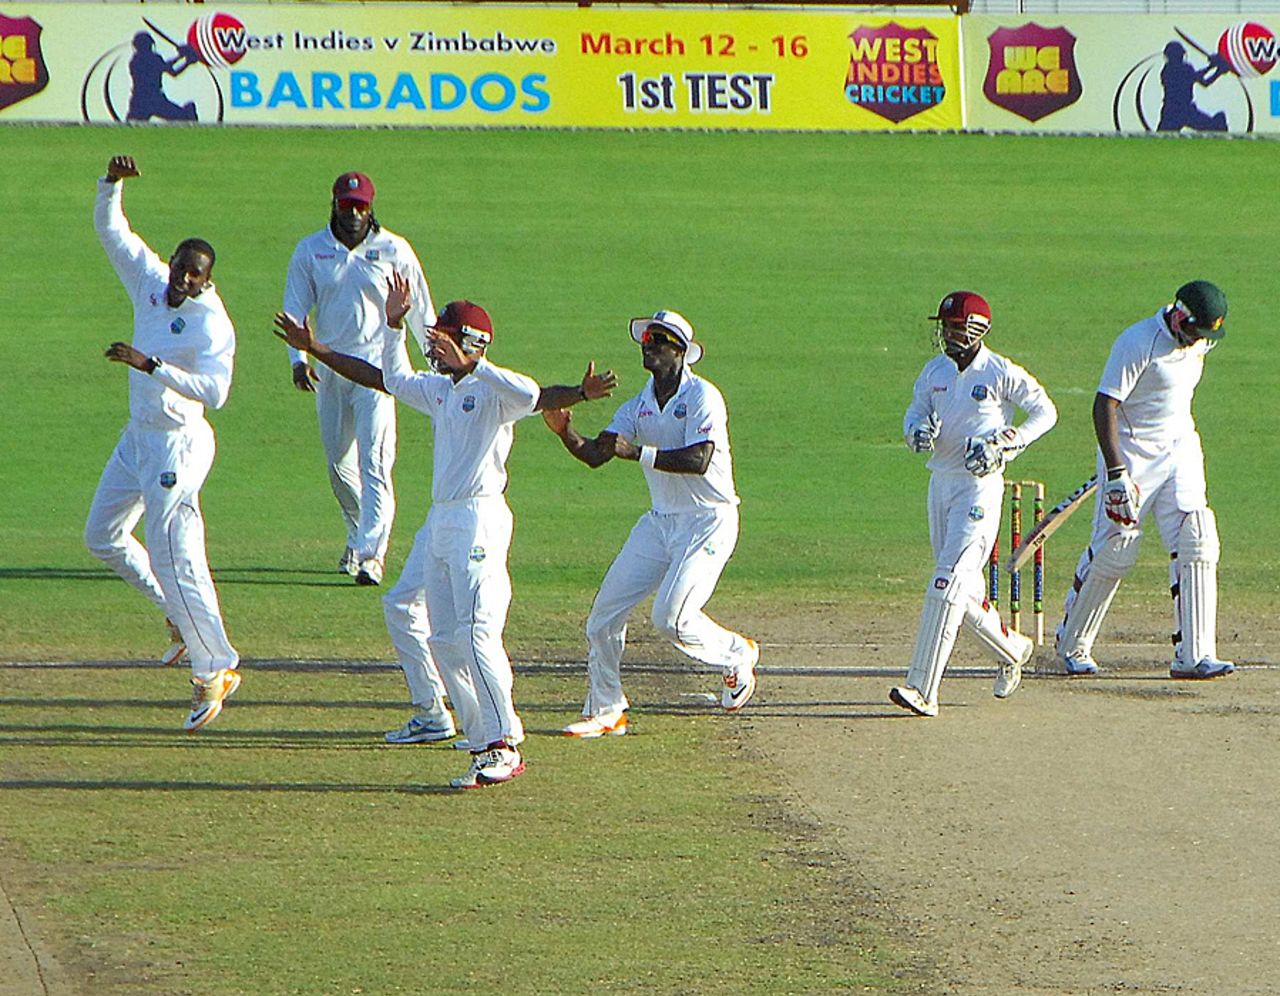 Shane Shillingford reacts after taking a wicket, West Indies v Zimbabwe, 1st Test, Barbados, 2nd day, March 13, 2013